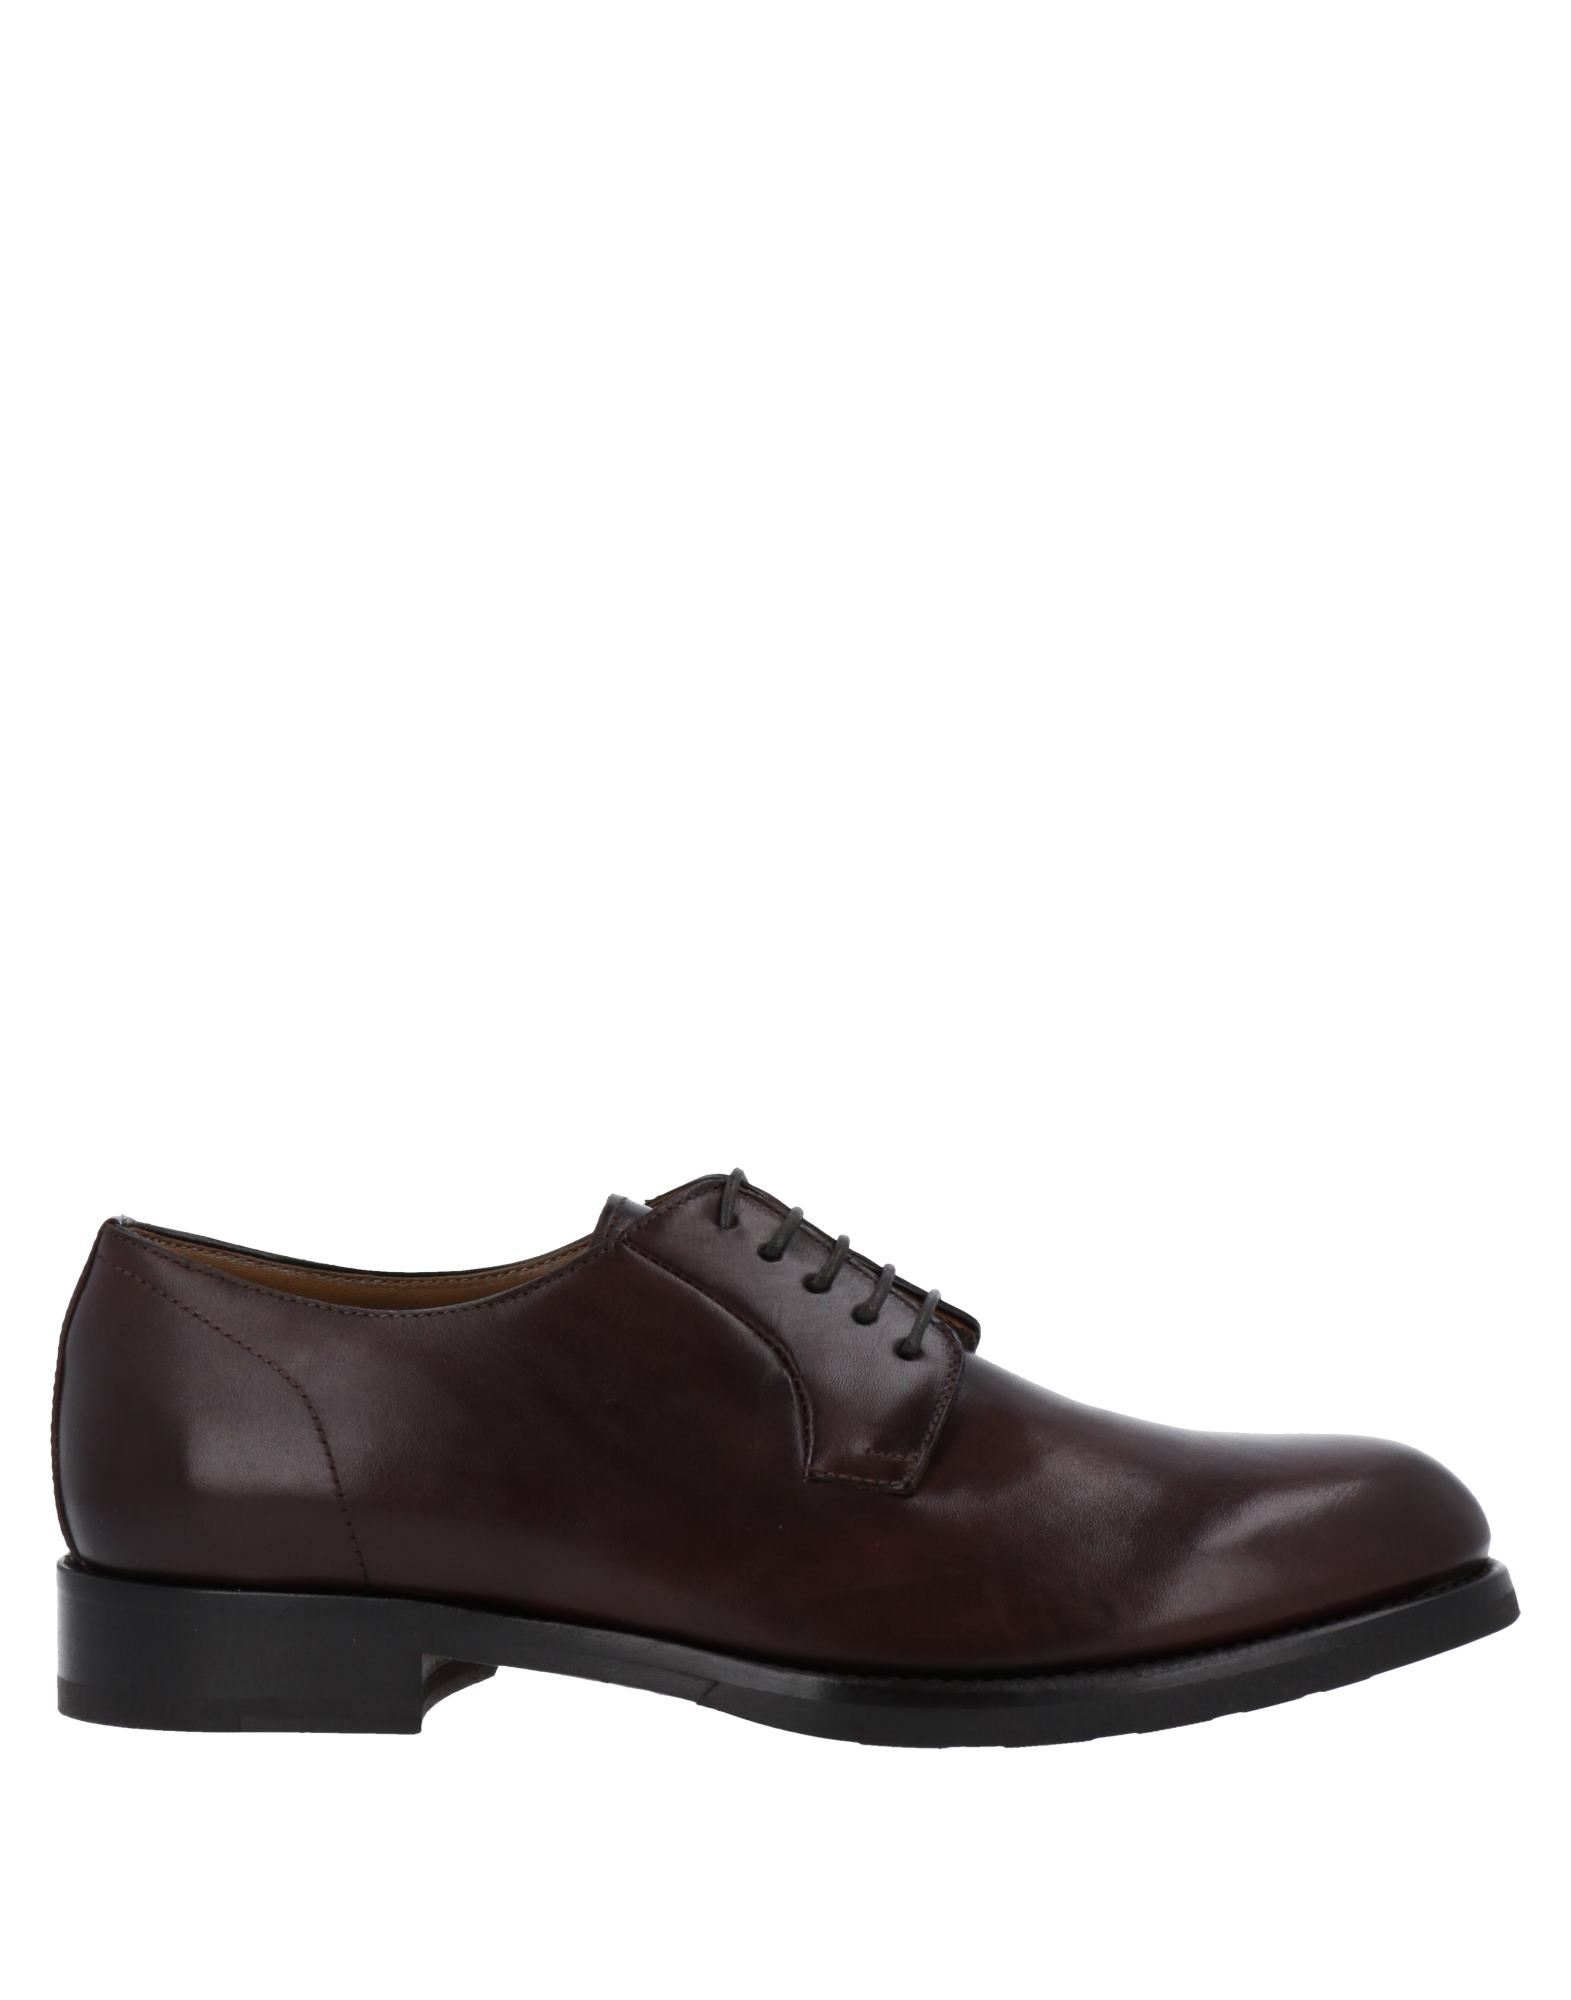 Calpierre Lace-up Shoes In Cocoa